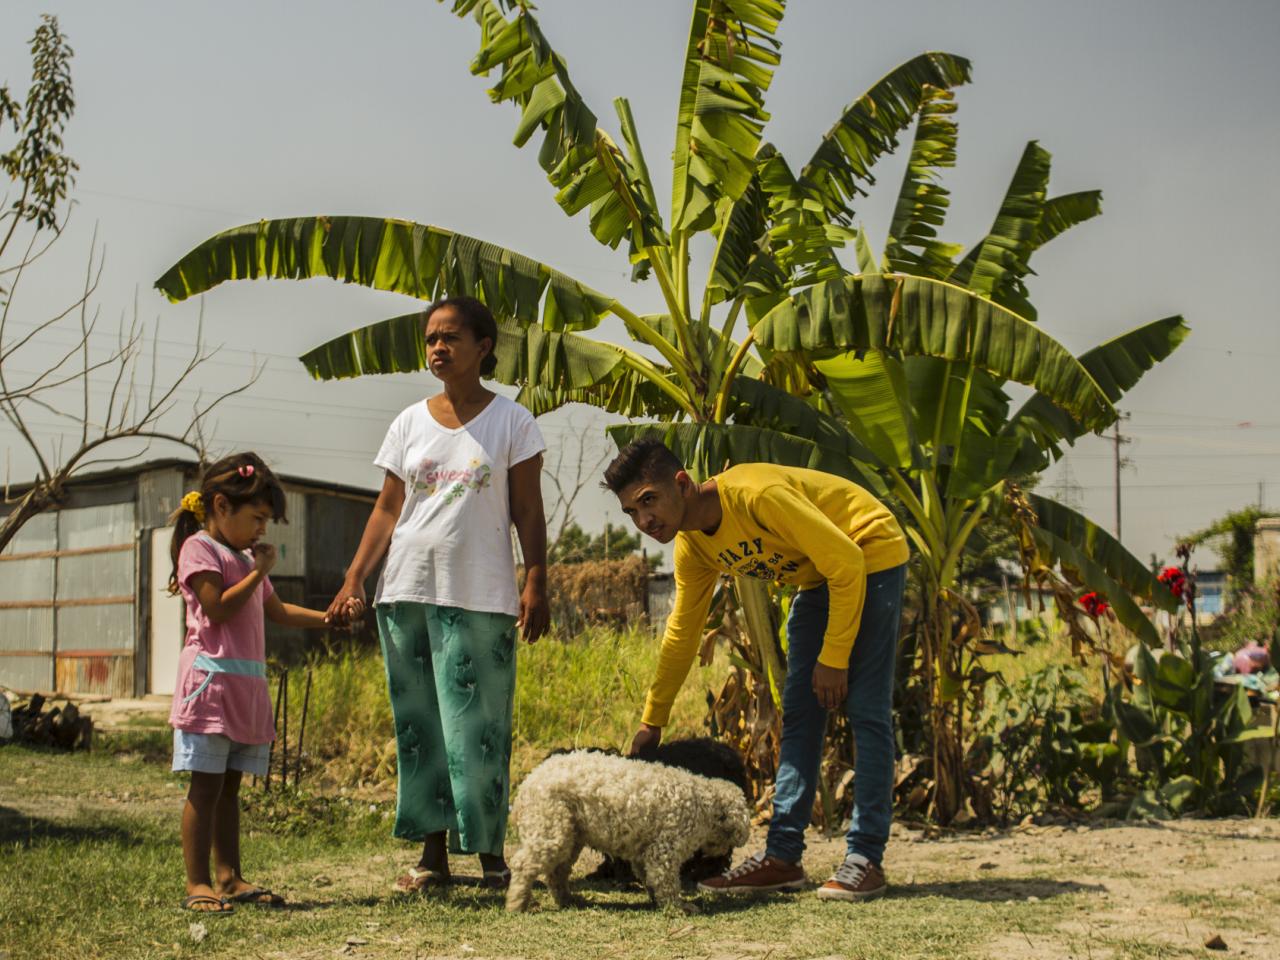 Production Still from Children of Las Brisas. Two adults and a child stand behind a tree in Venezuela. There is also a small dog in the photo.